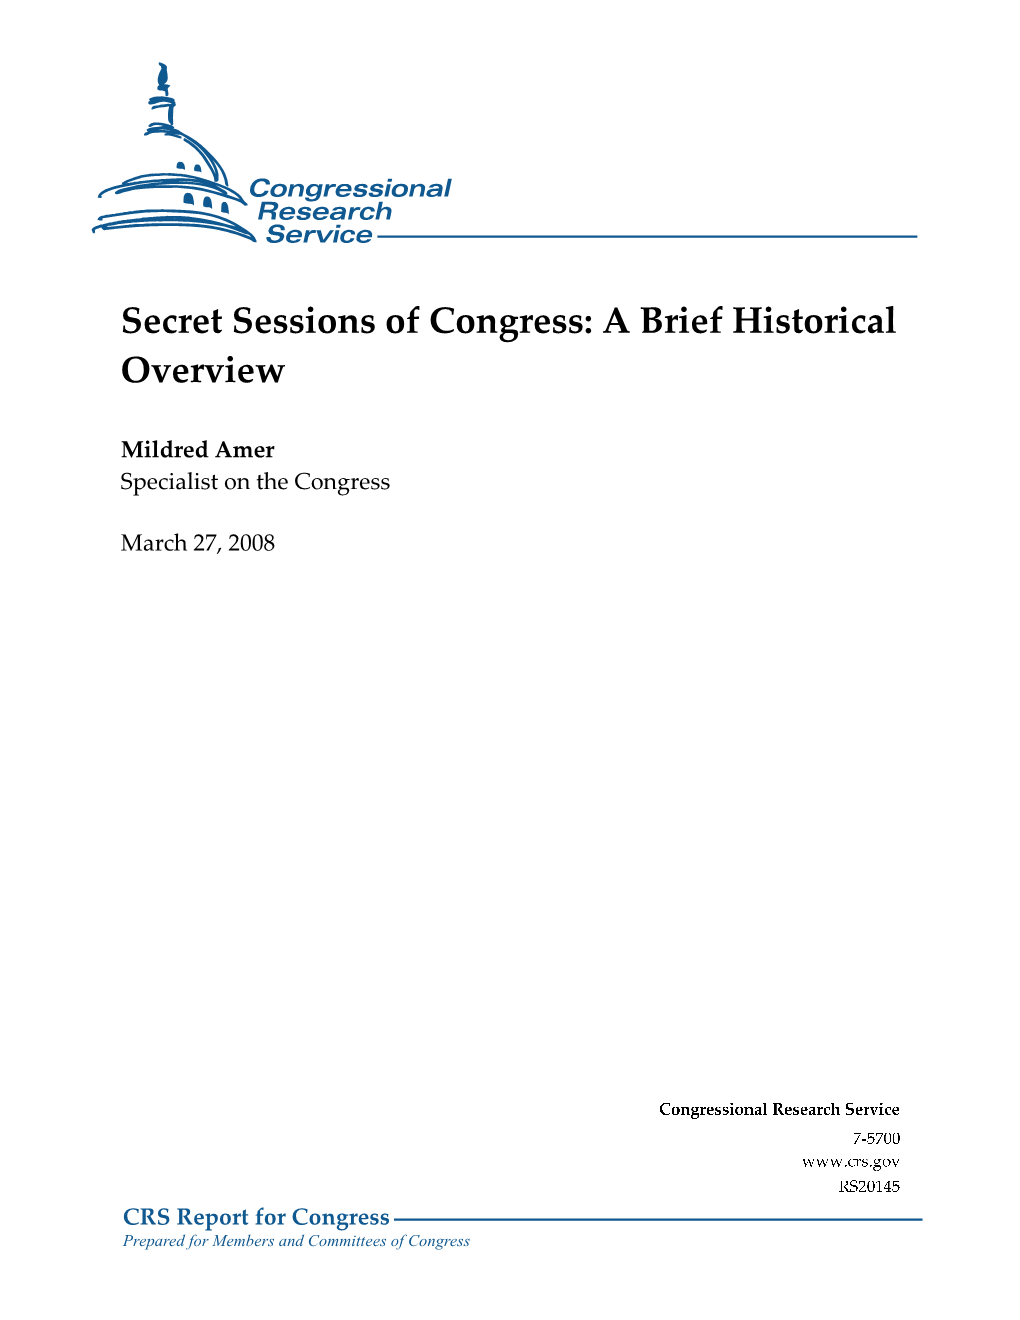 Secret Sessions of Congress: a Brief Historical Overview